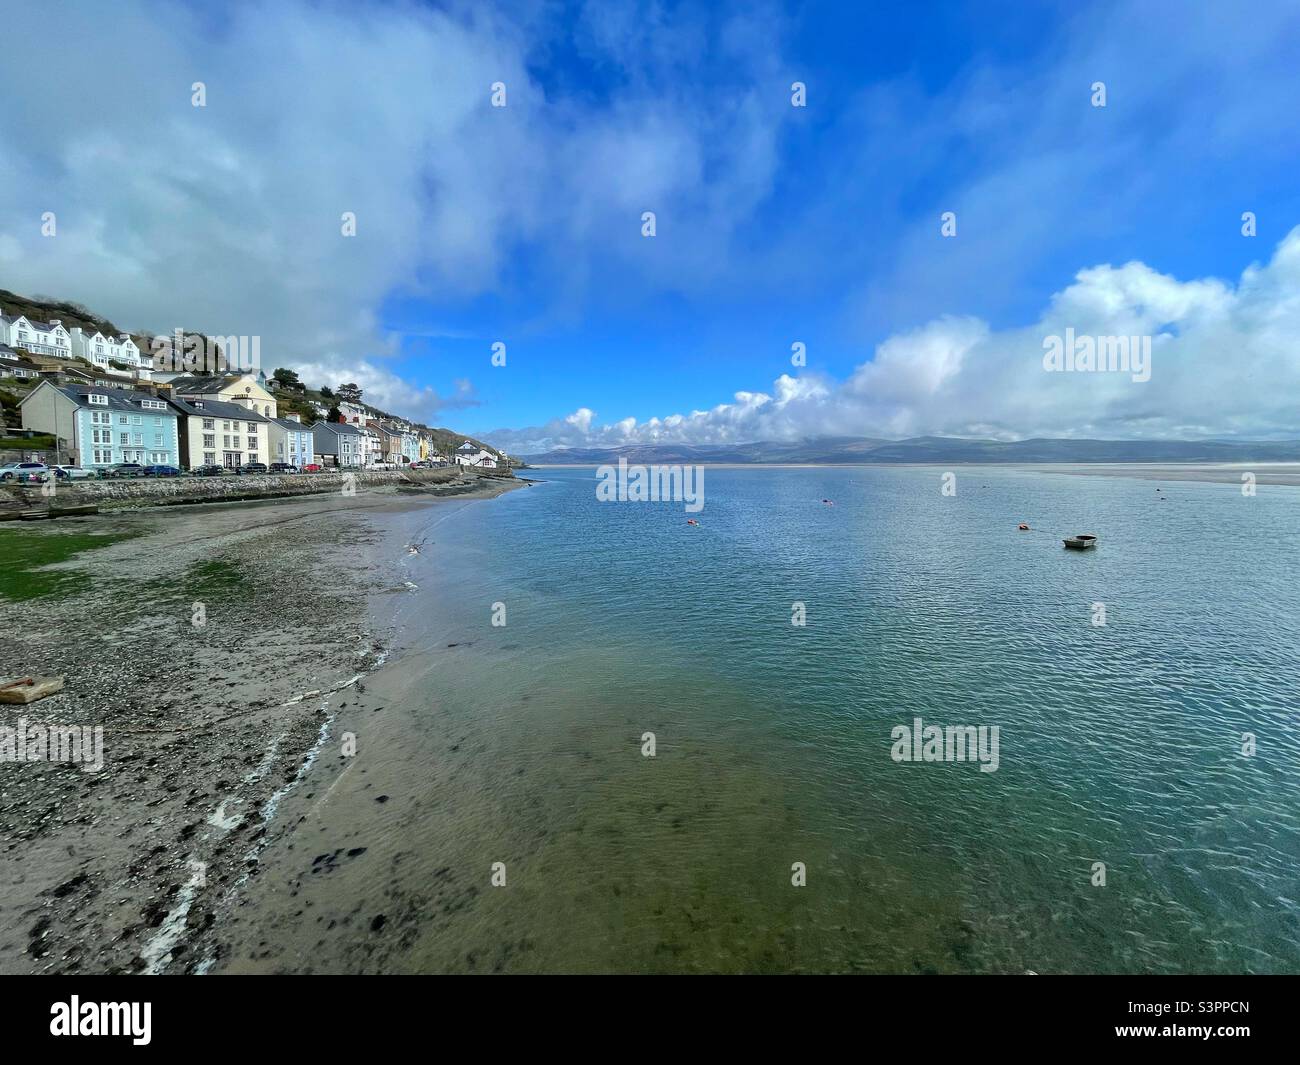 Aberdovey on the estuary of the river Dovey, Gwynedd, North Wales, April. Stock Photo